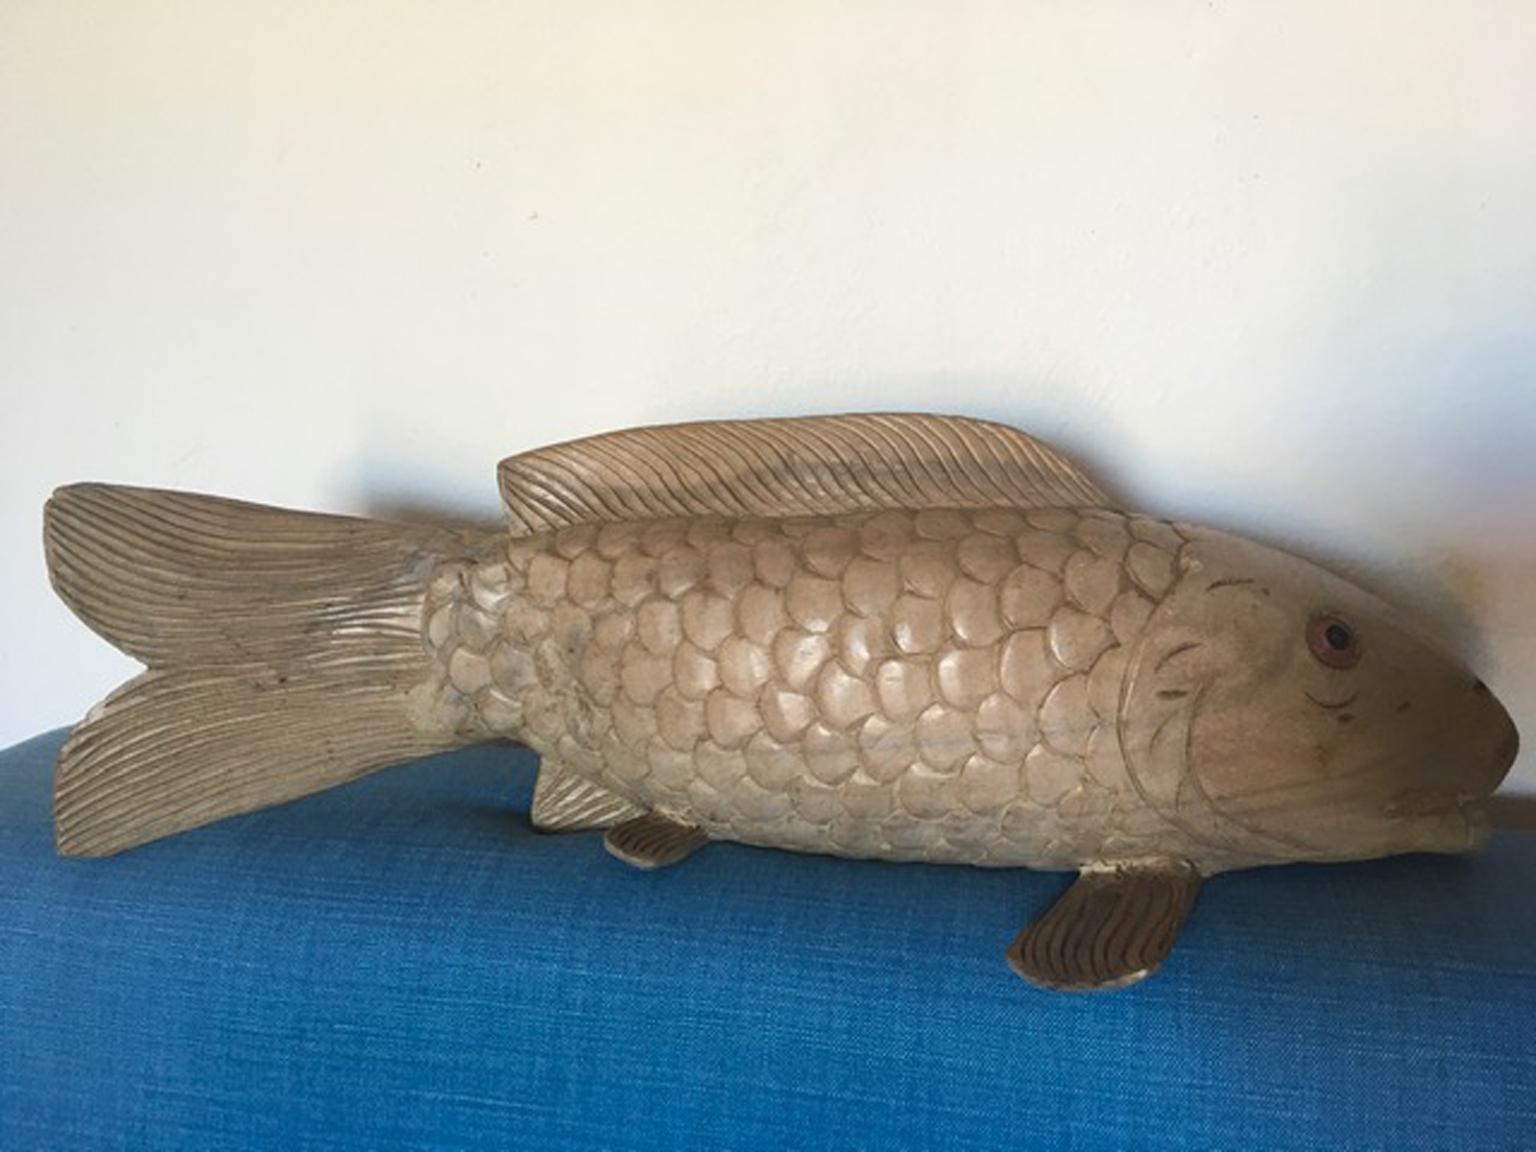 This animal sculpture well reproduce a natural fish in natural dimensions.
A nice piece that can be useful to decor a kitchen or a dining room.